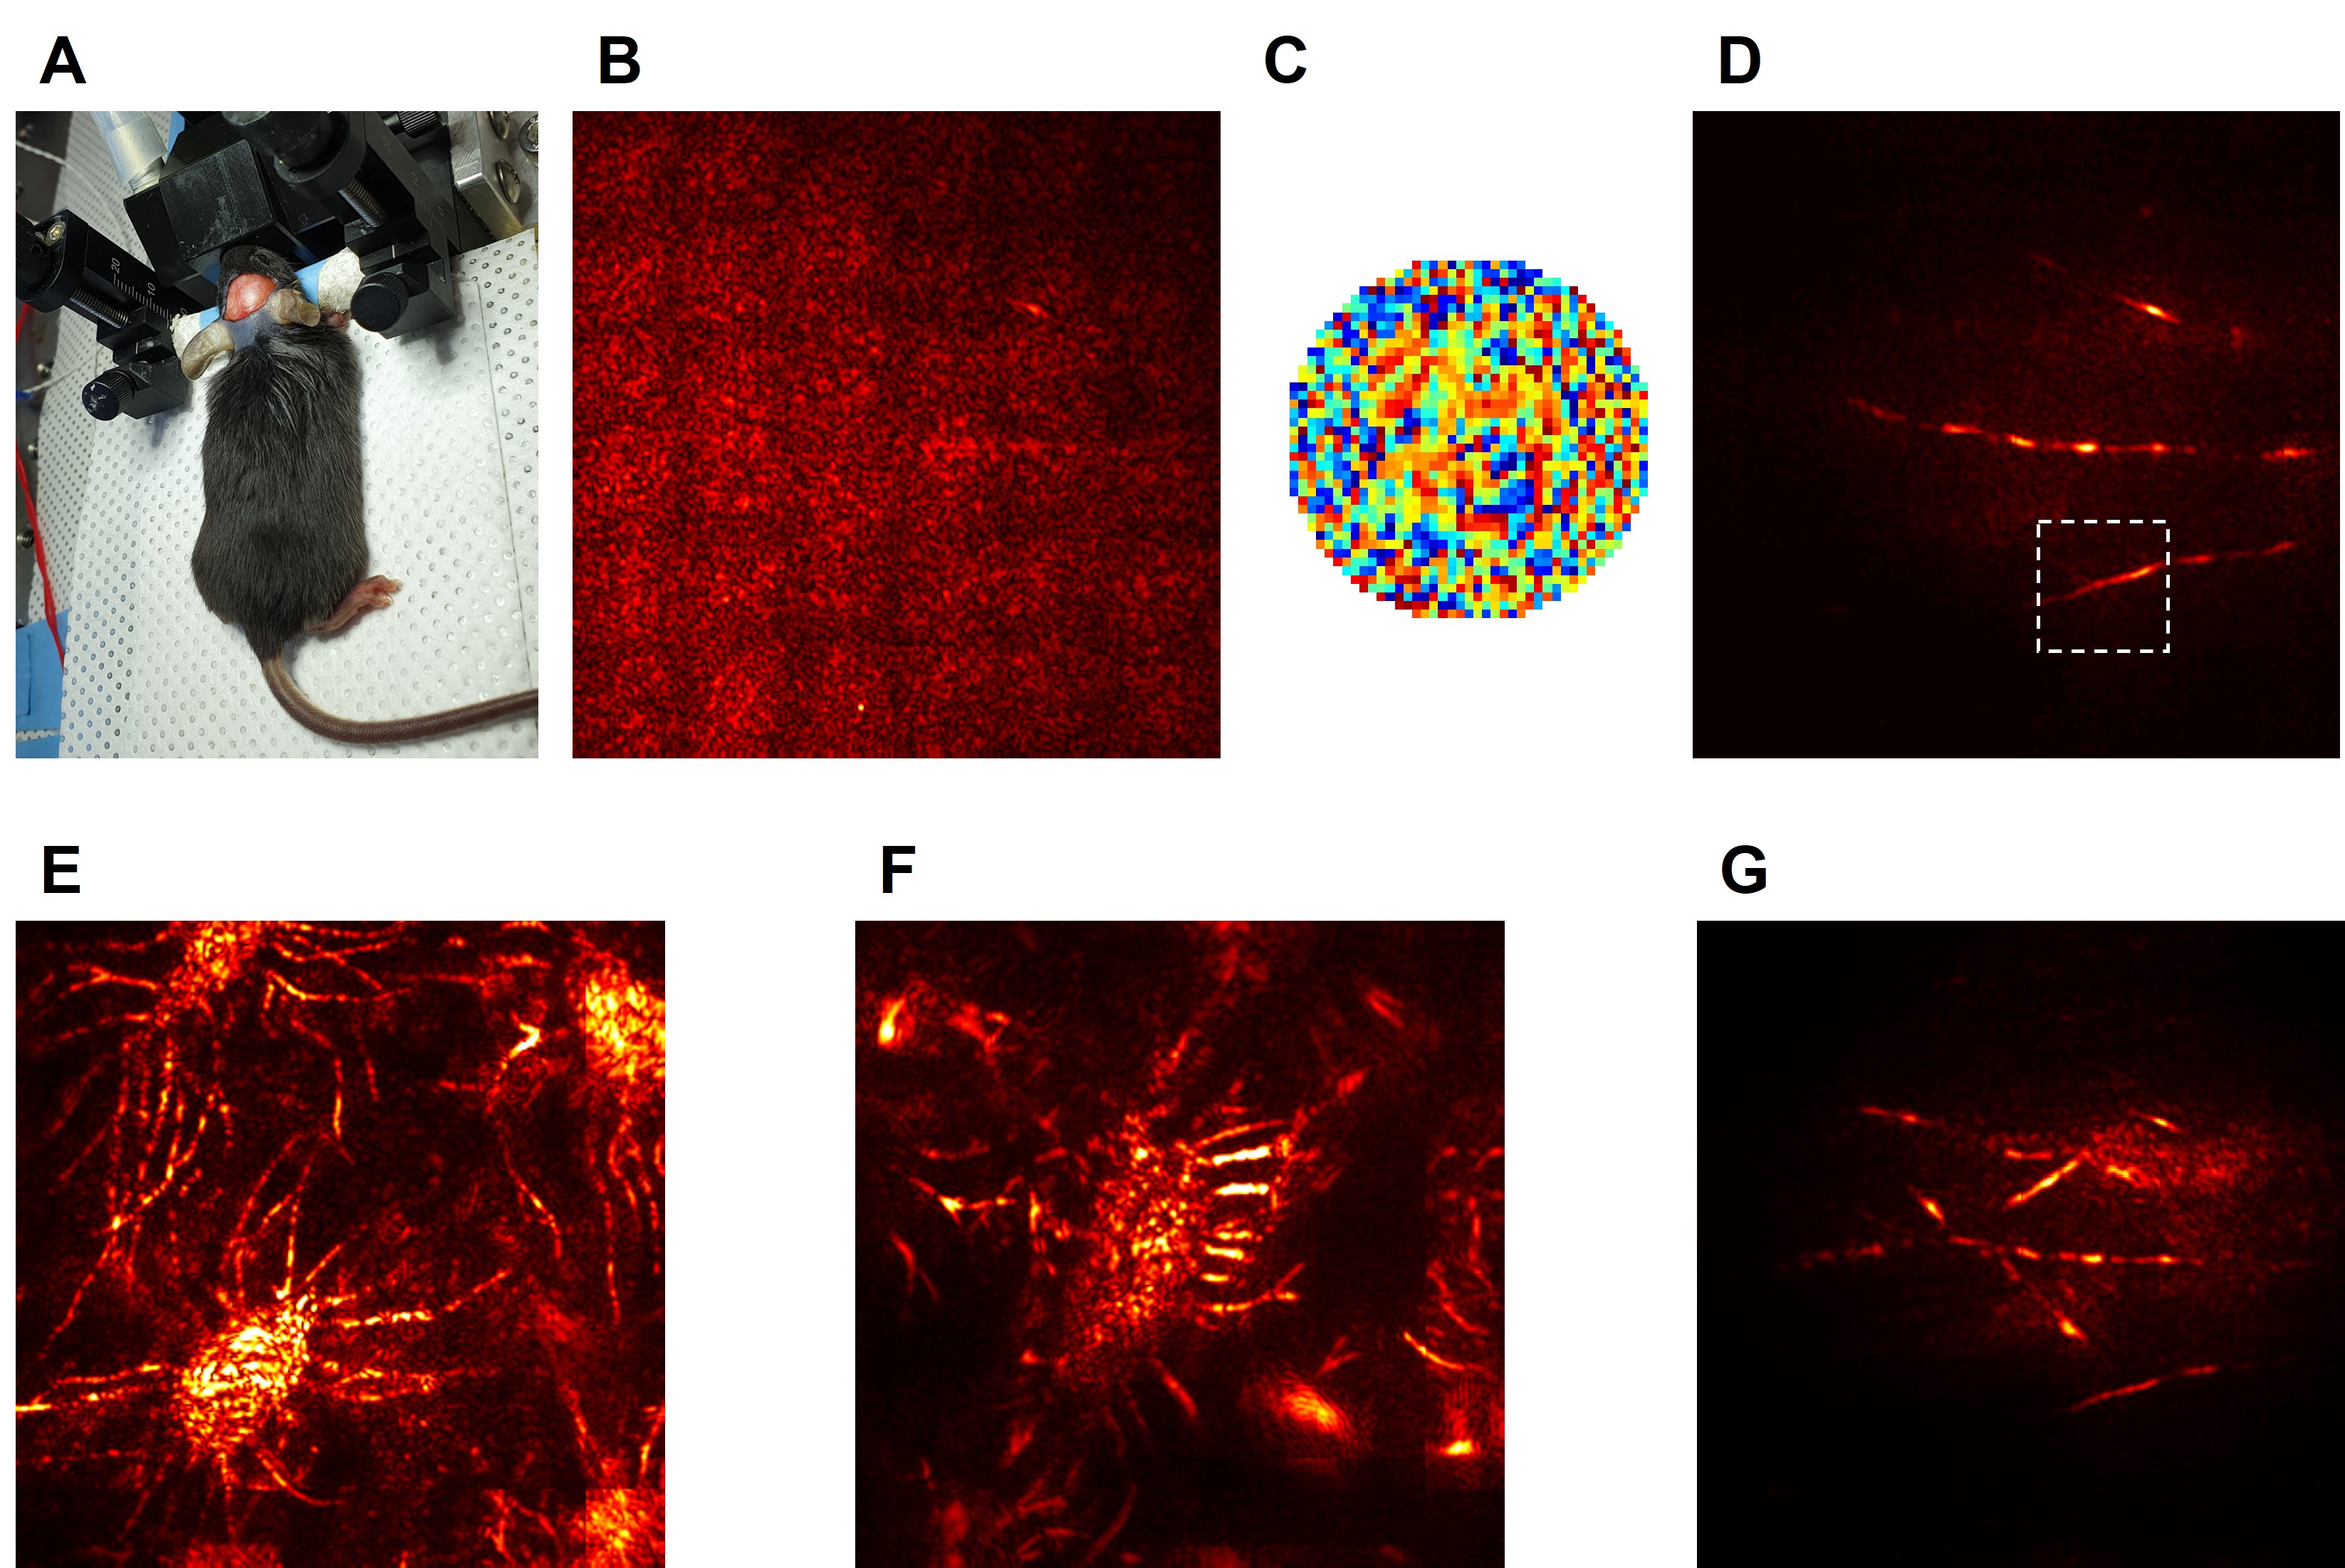 Figure 3. A neural network in the brain of a living mouse was observed without removing the skull